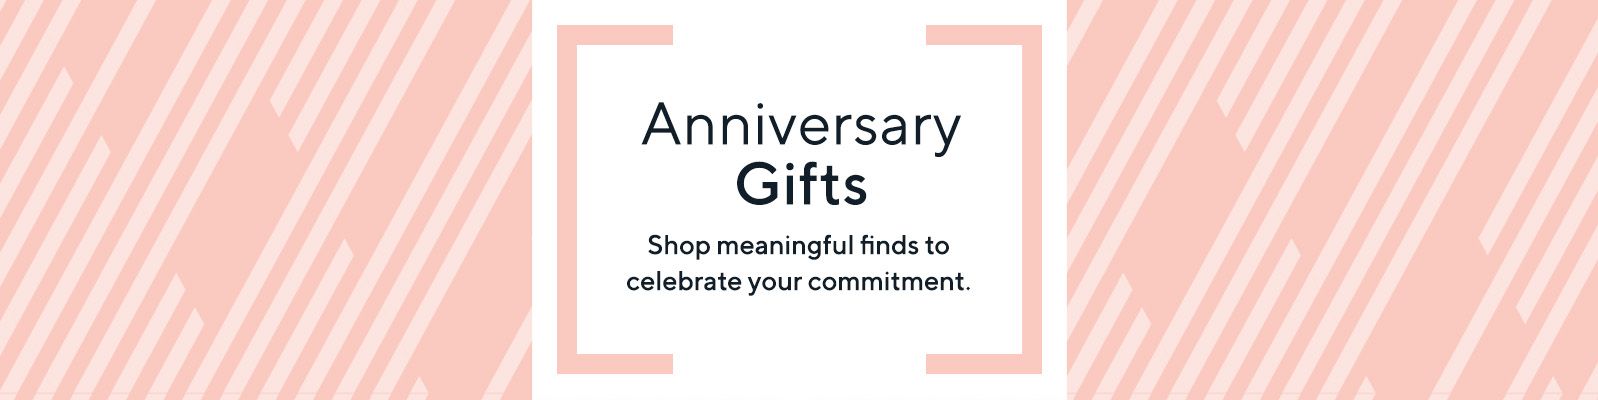 Anniversary Gifts  Shop meaningful finds to celebrate your commitment.